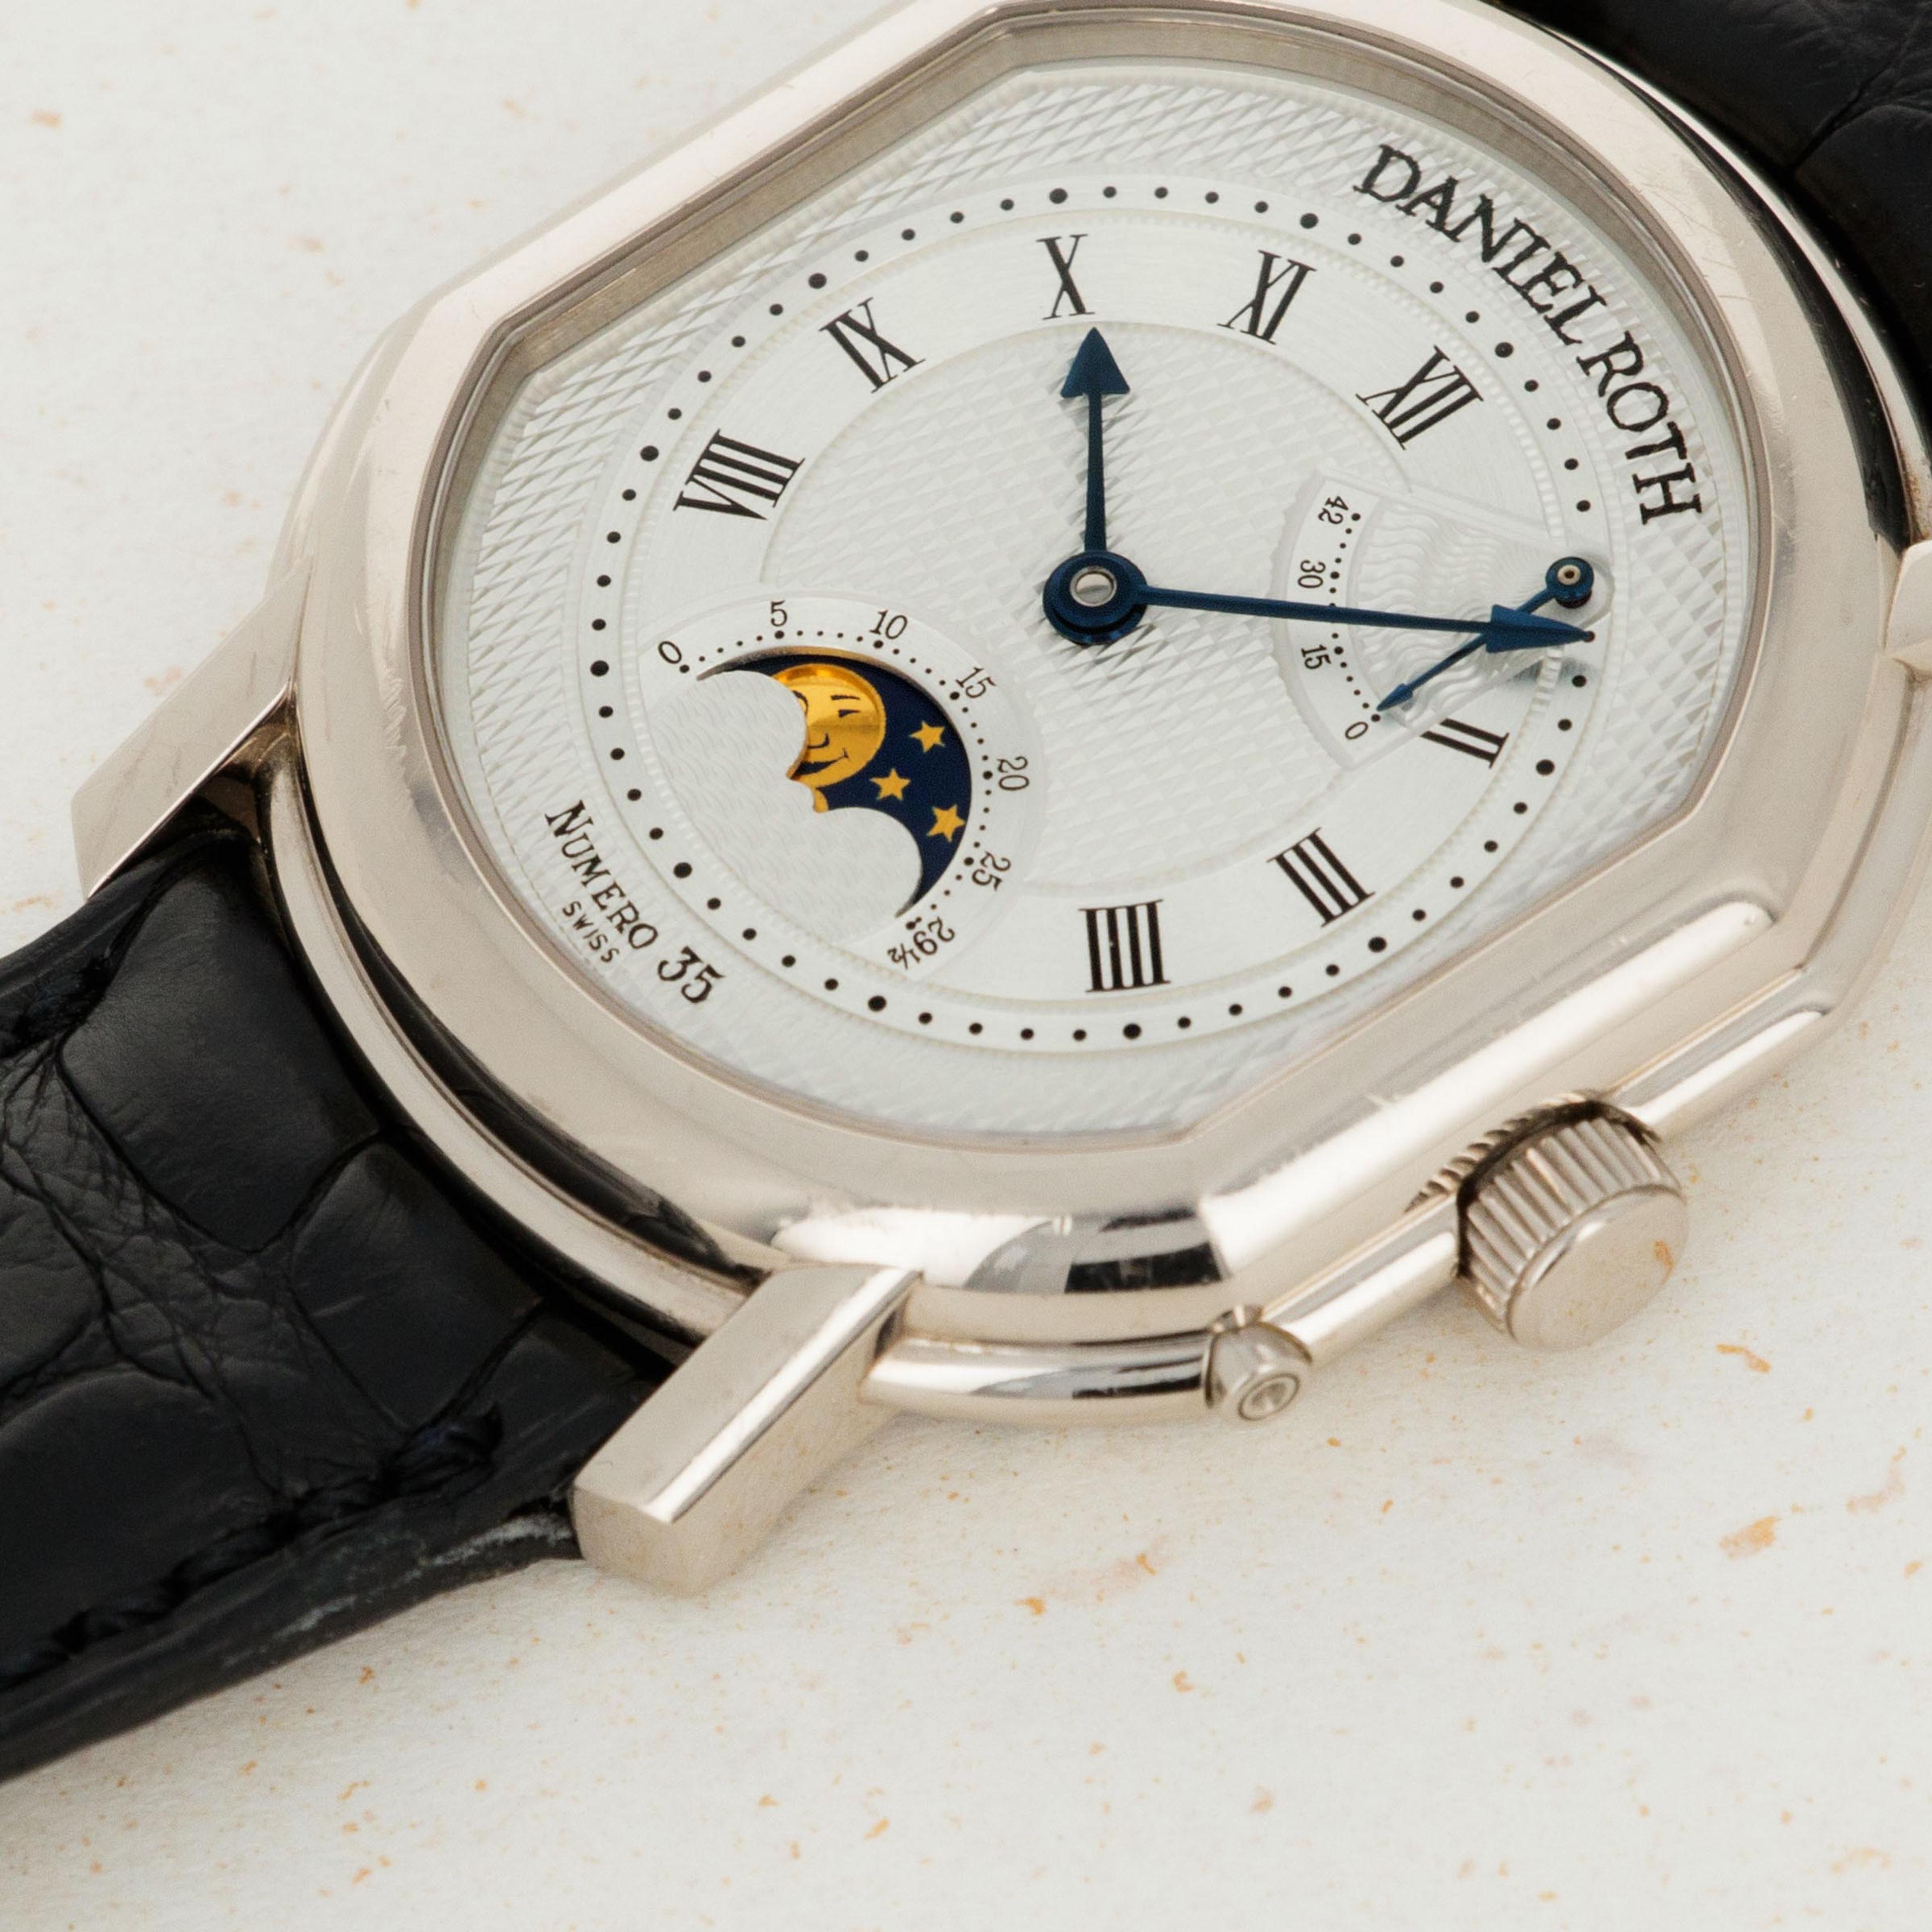 Daniel Roth Moon Phase Power Reserve 0357BCSL | Auctions | Loupe This